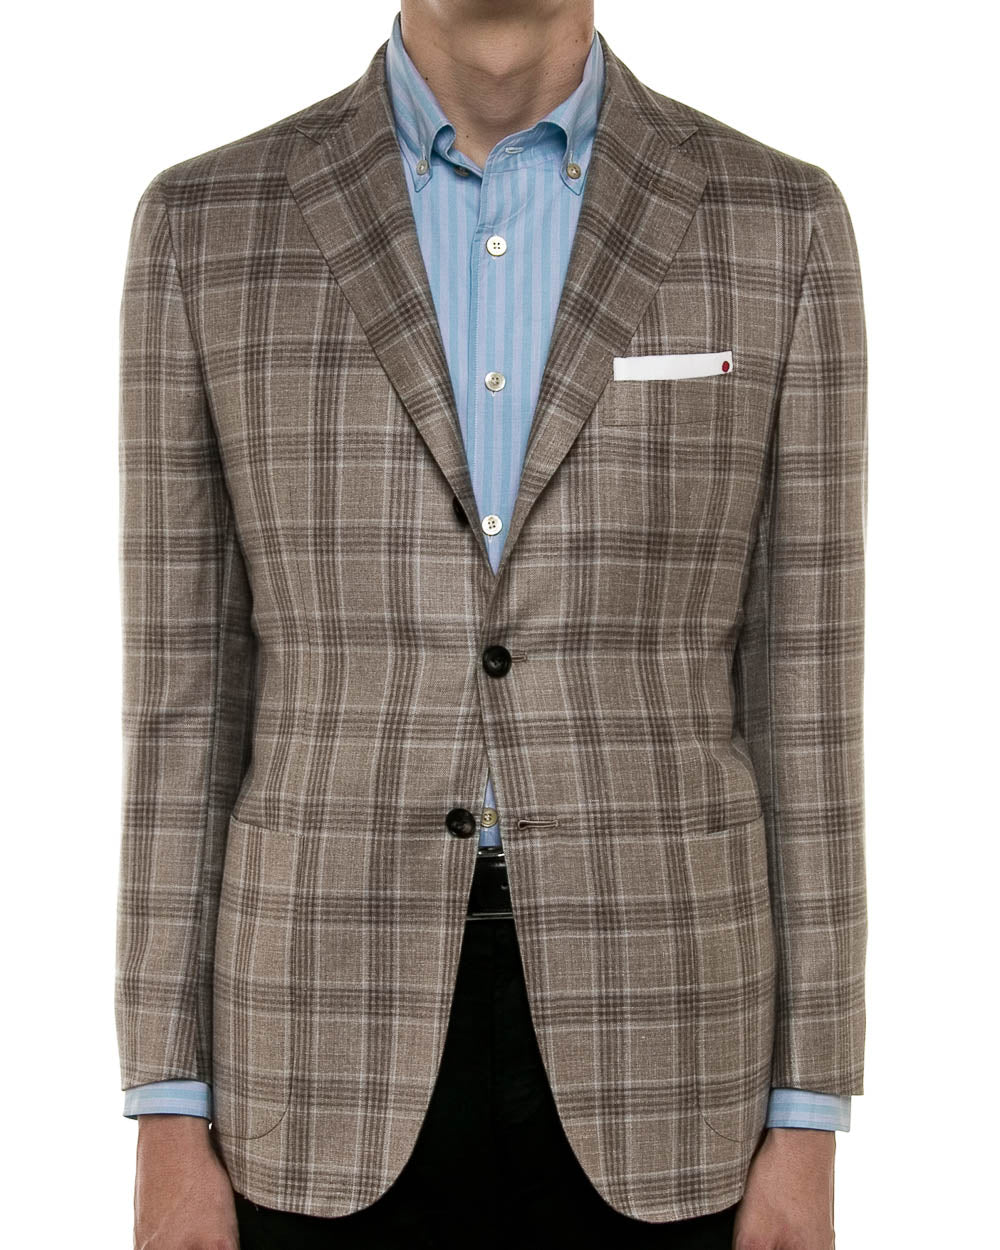 Tan and Teal Plaid Sportcoat